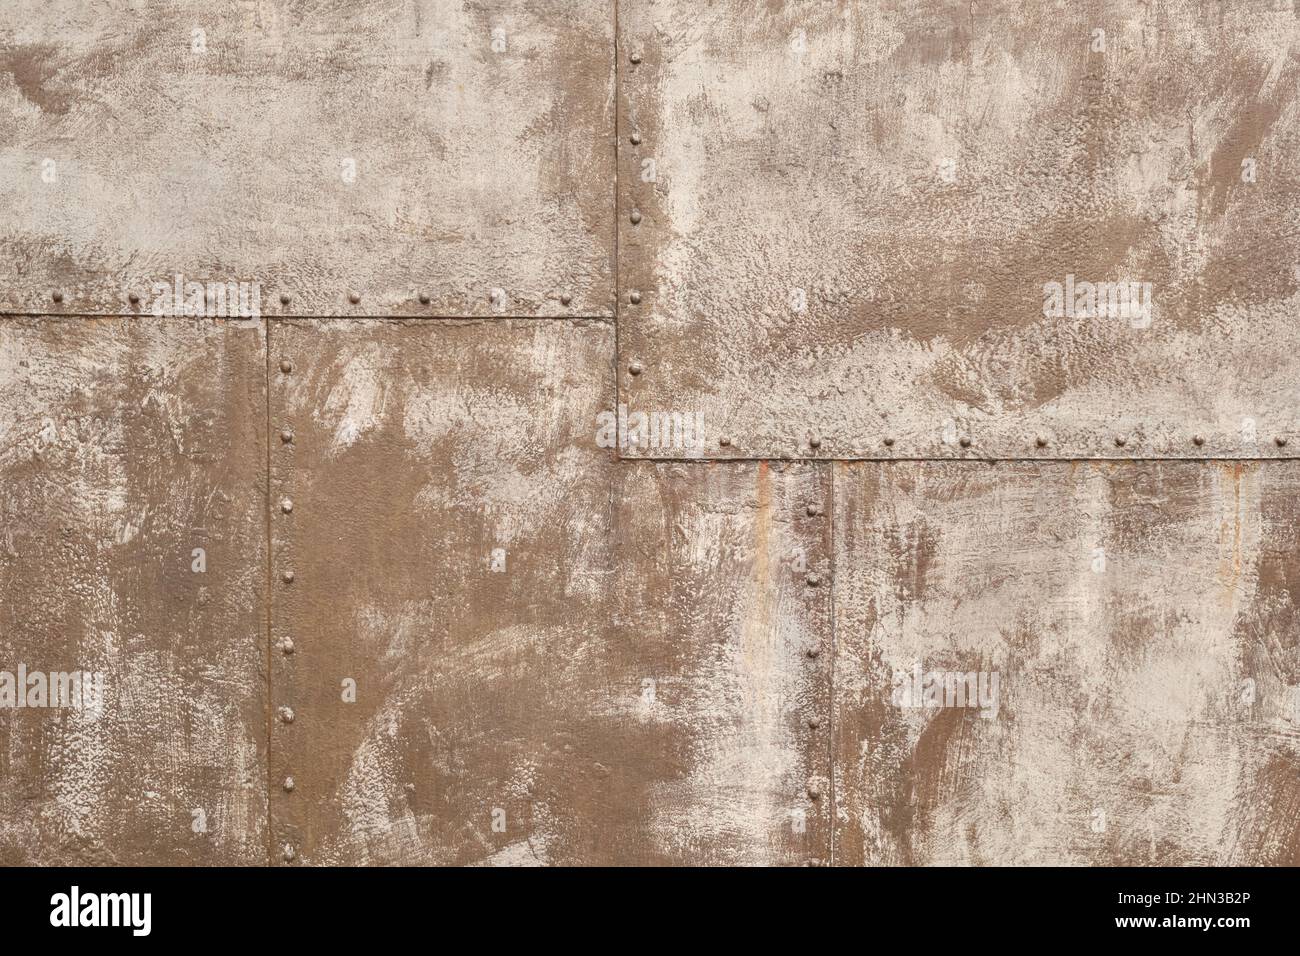 Metal texture with rivets as steam punk background Stock Photo